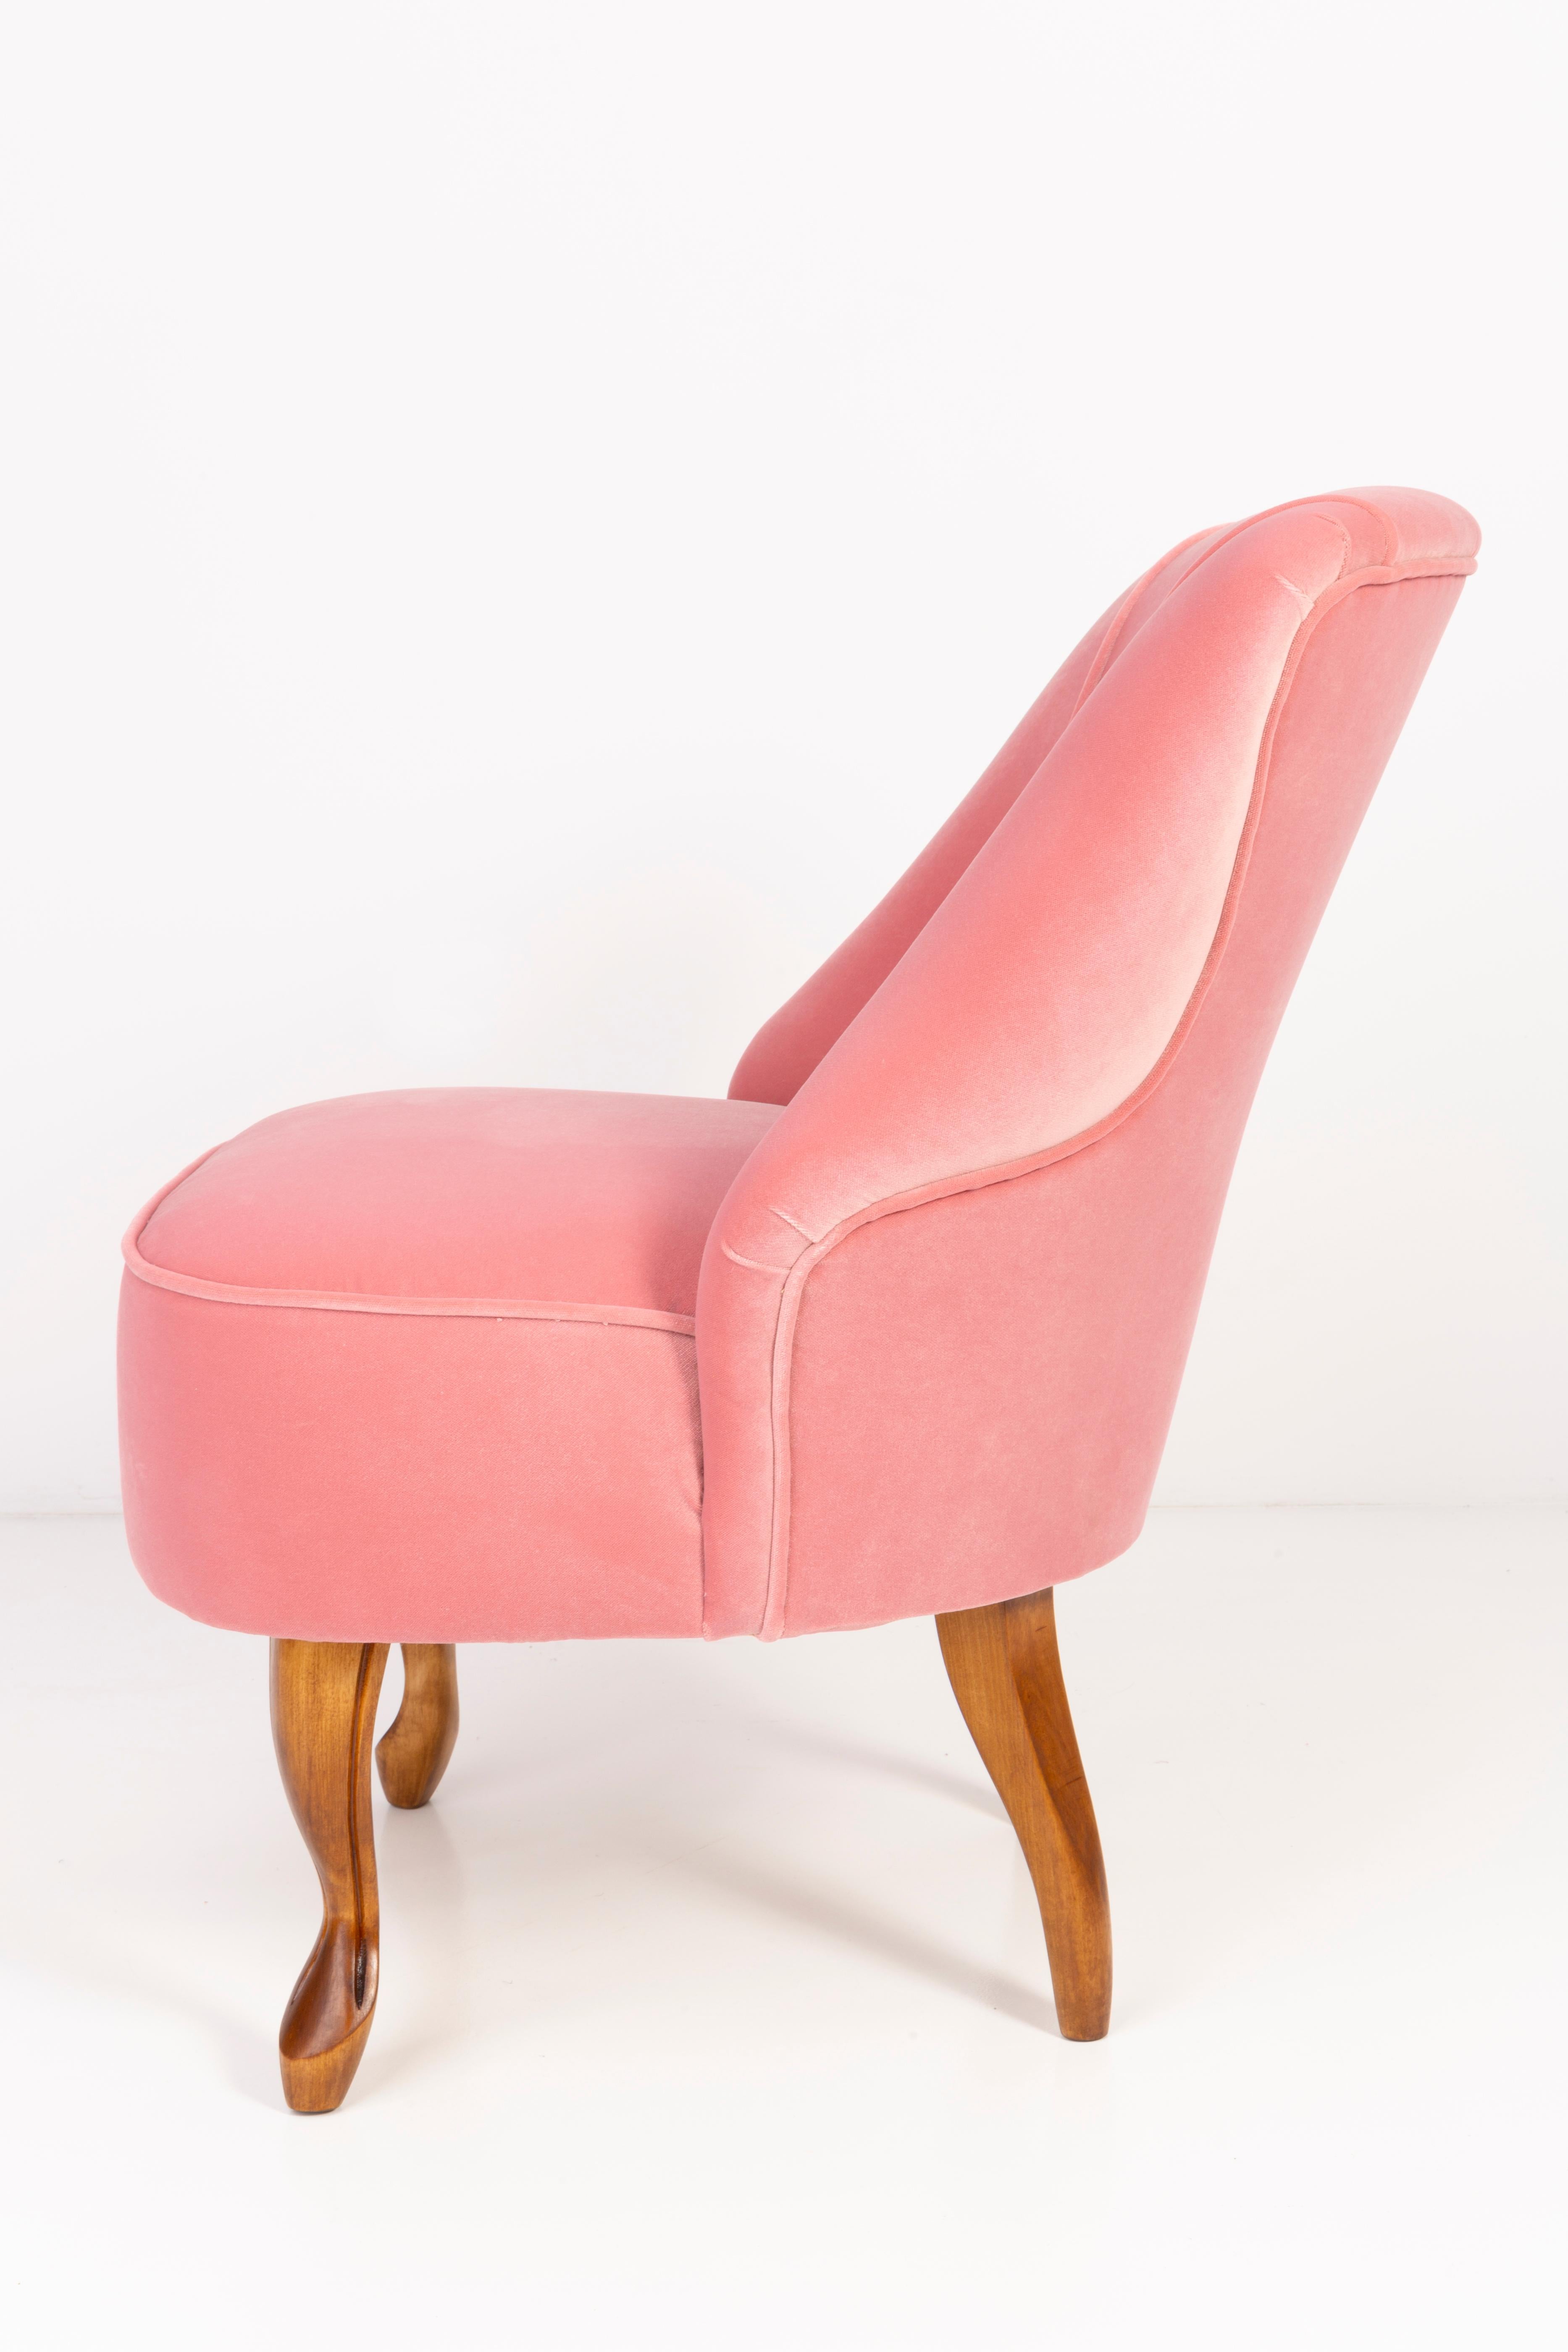 Set of Four 20th Century Art Deco Baby Pink Armchairs, 1950s For Sale 2